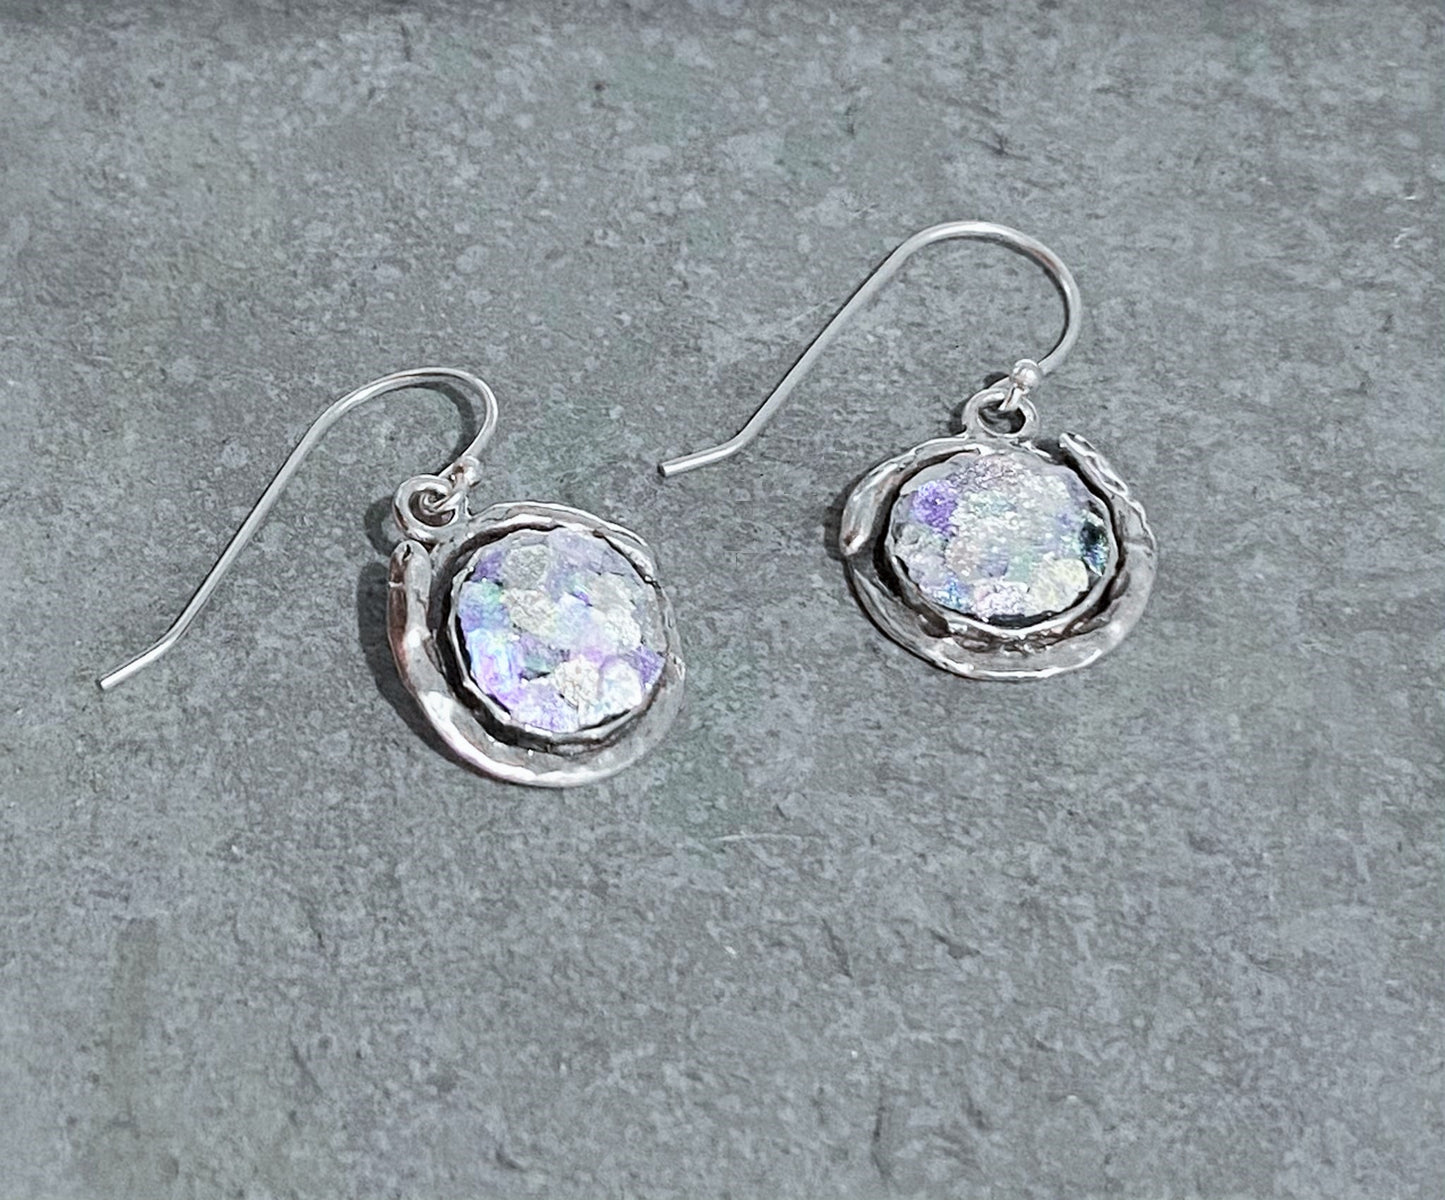 Sterling silver drop earrings with a Roman glass circle as the centerpiece. The glass is 2000 years old. 1.25" long including the wire.